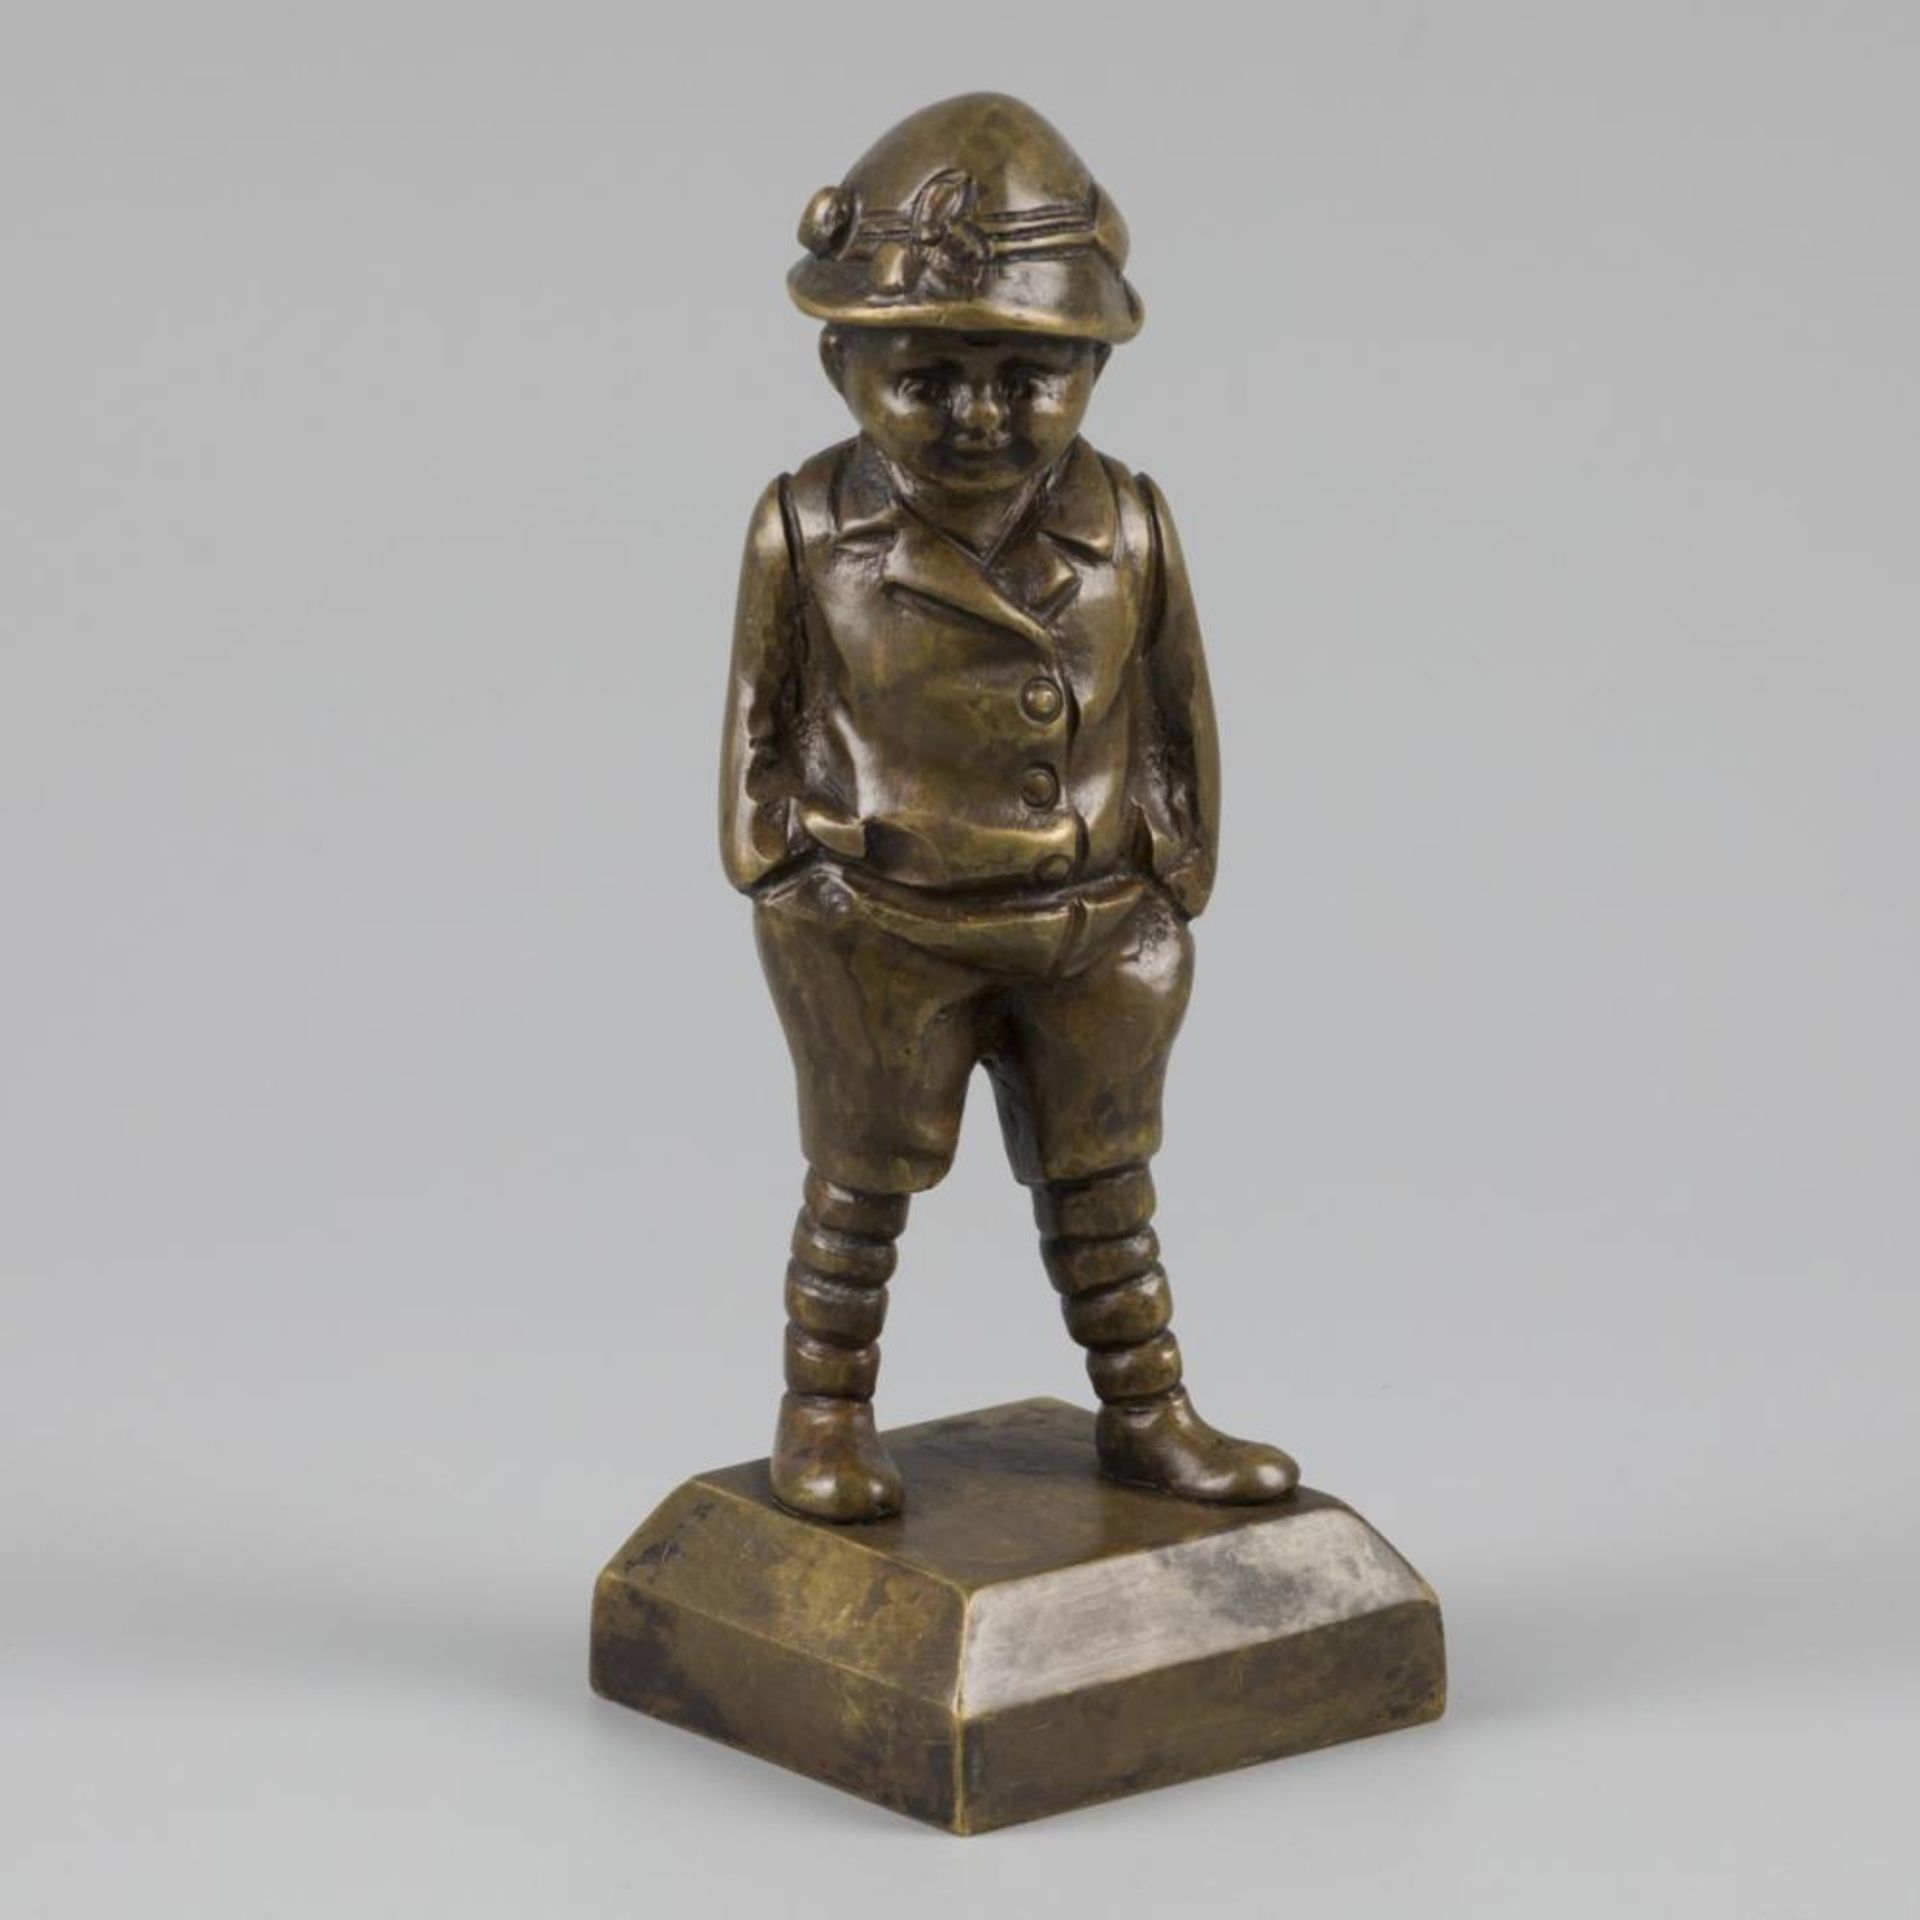 A bronze sculpture of a toddler with his hands in his pockets, Belgium, ca. 1920. - Image 2 of 6